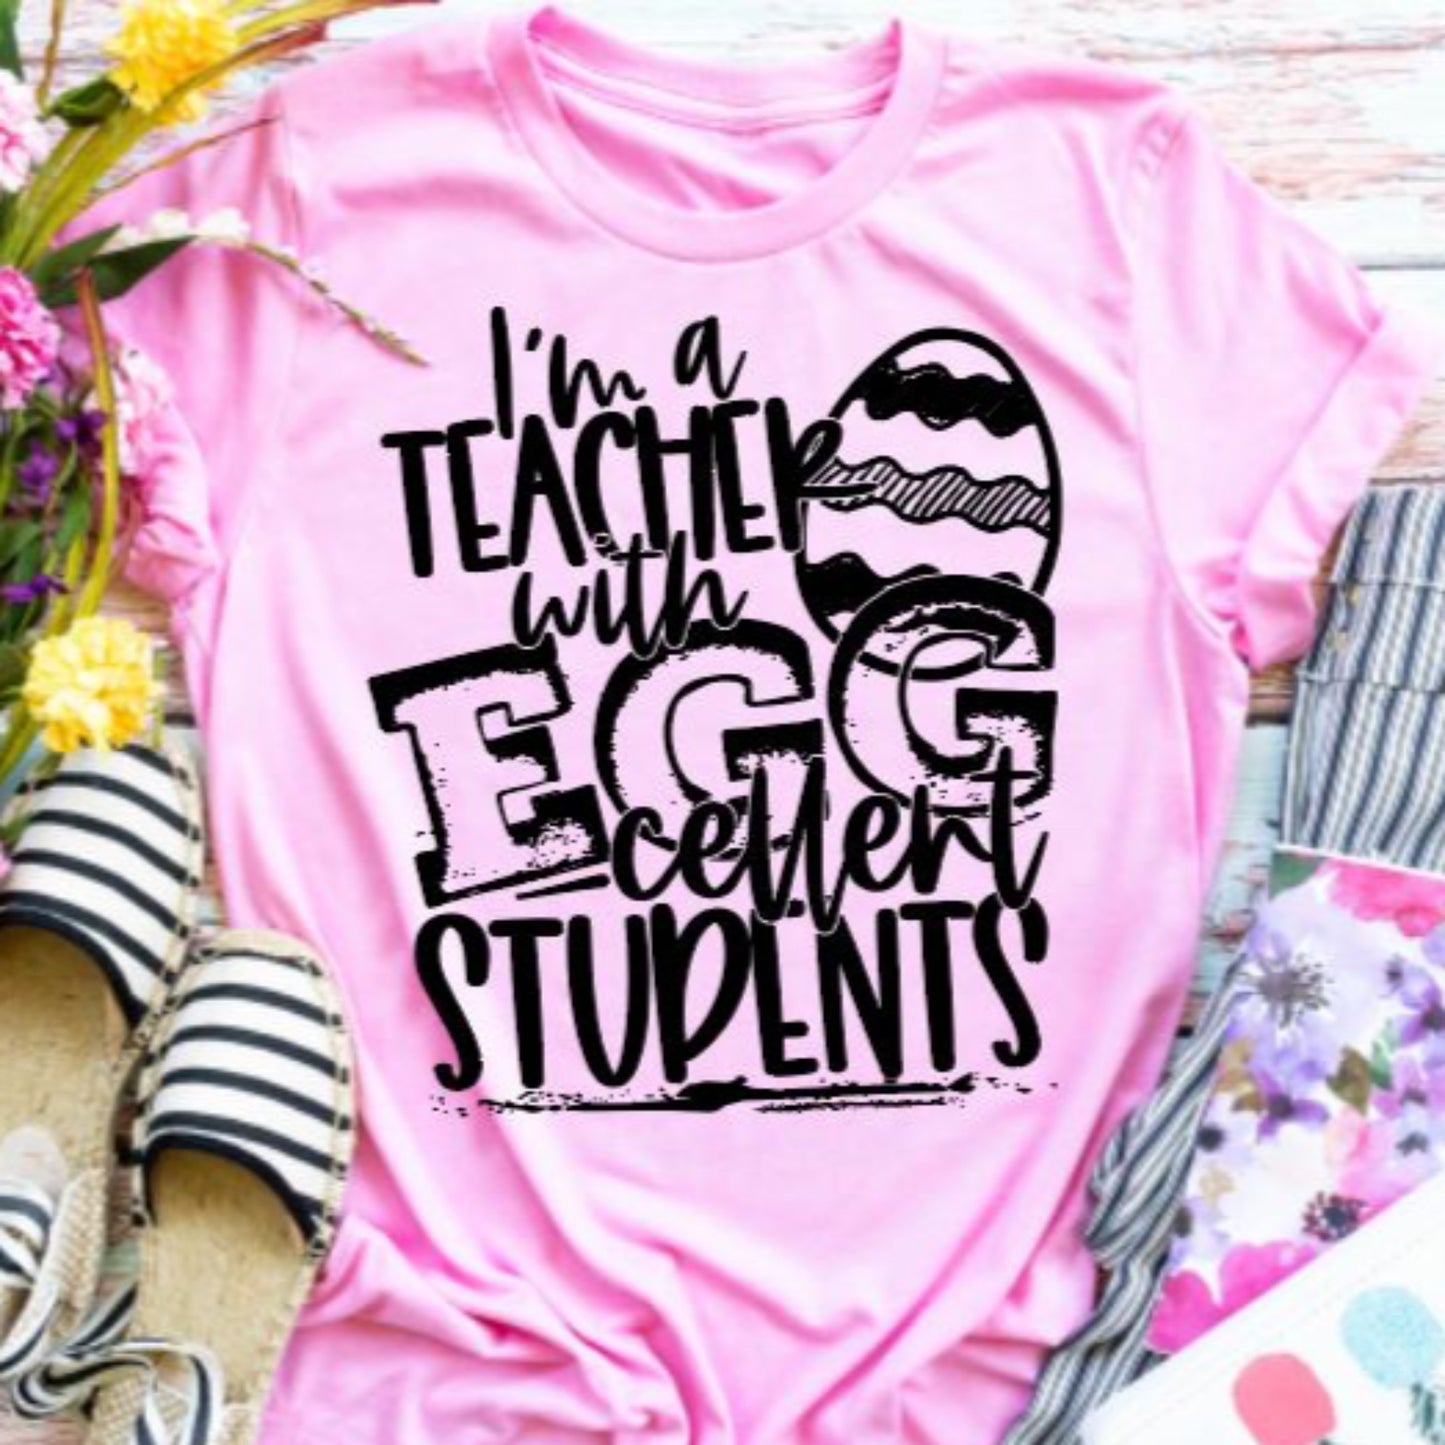 Egg-cellent Students Tee